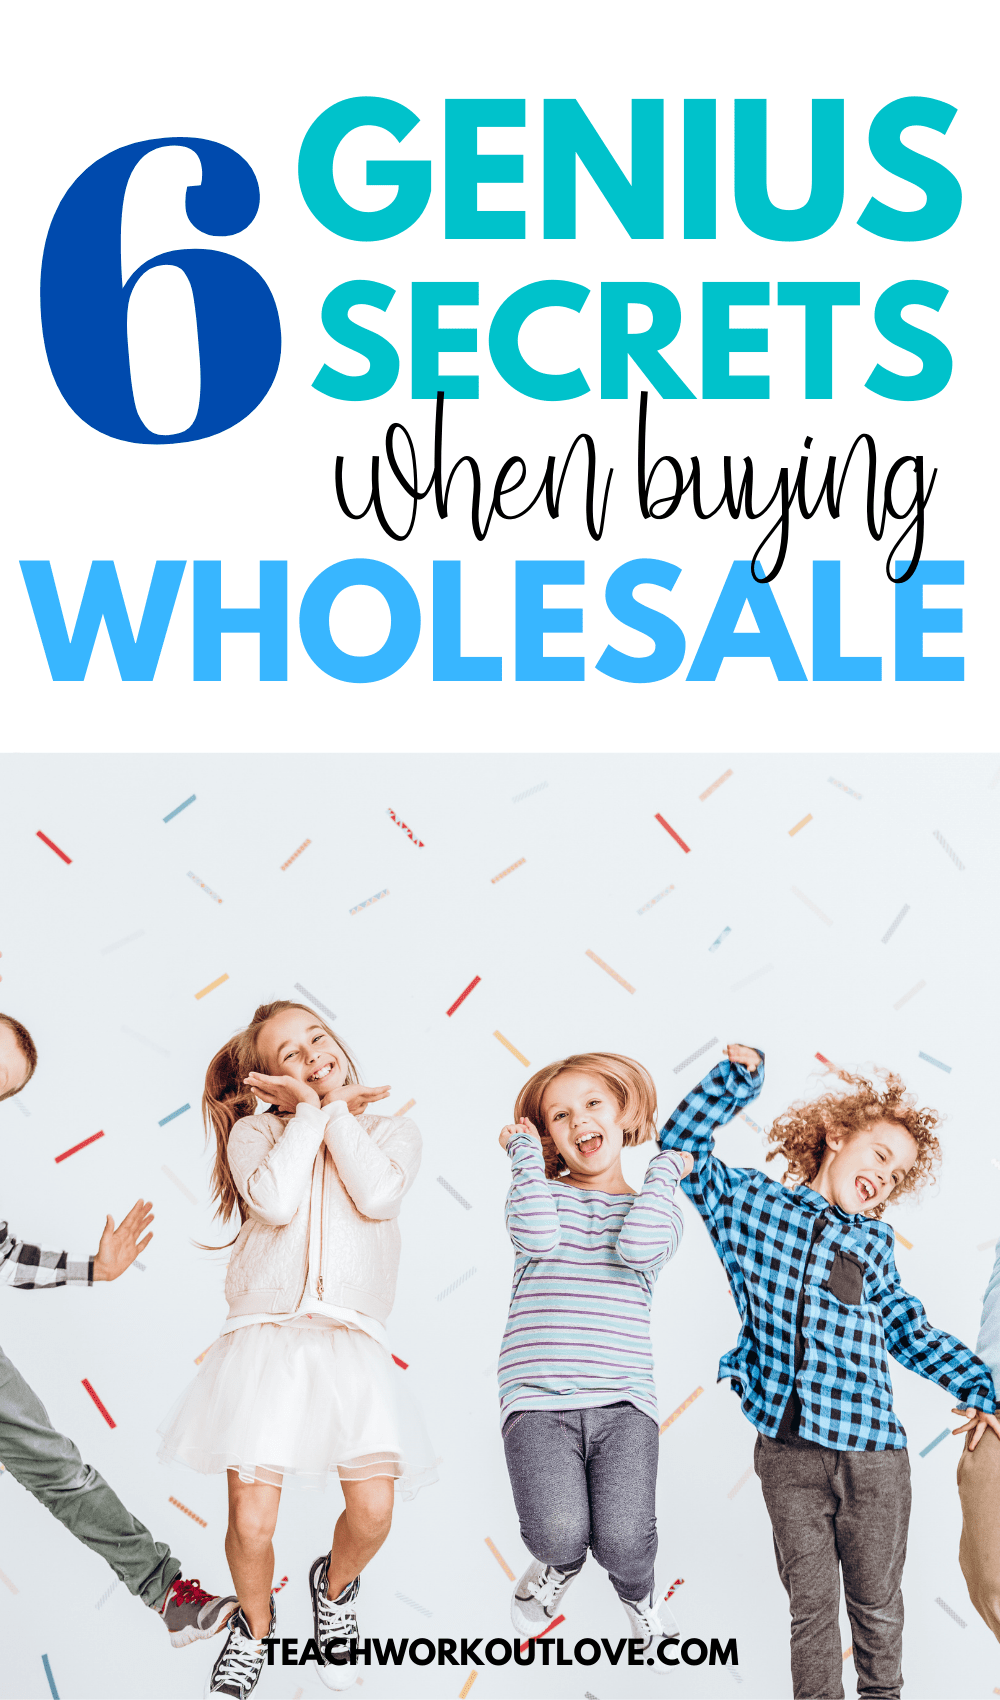 You can buy baby clothes online nowadays. That is why if you are first-time parents, you need these 6 tips to know how to buy kids clothes wholesale.